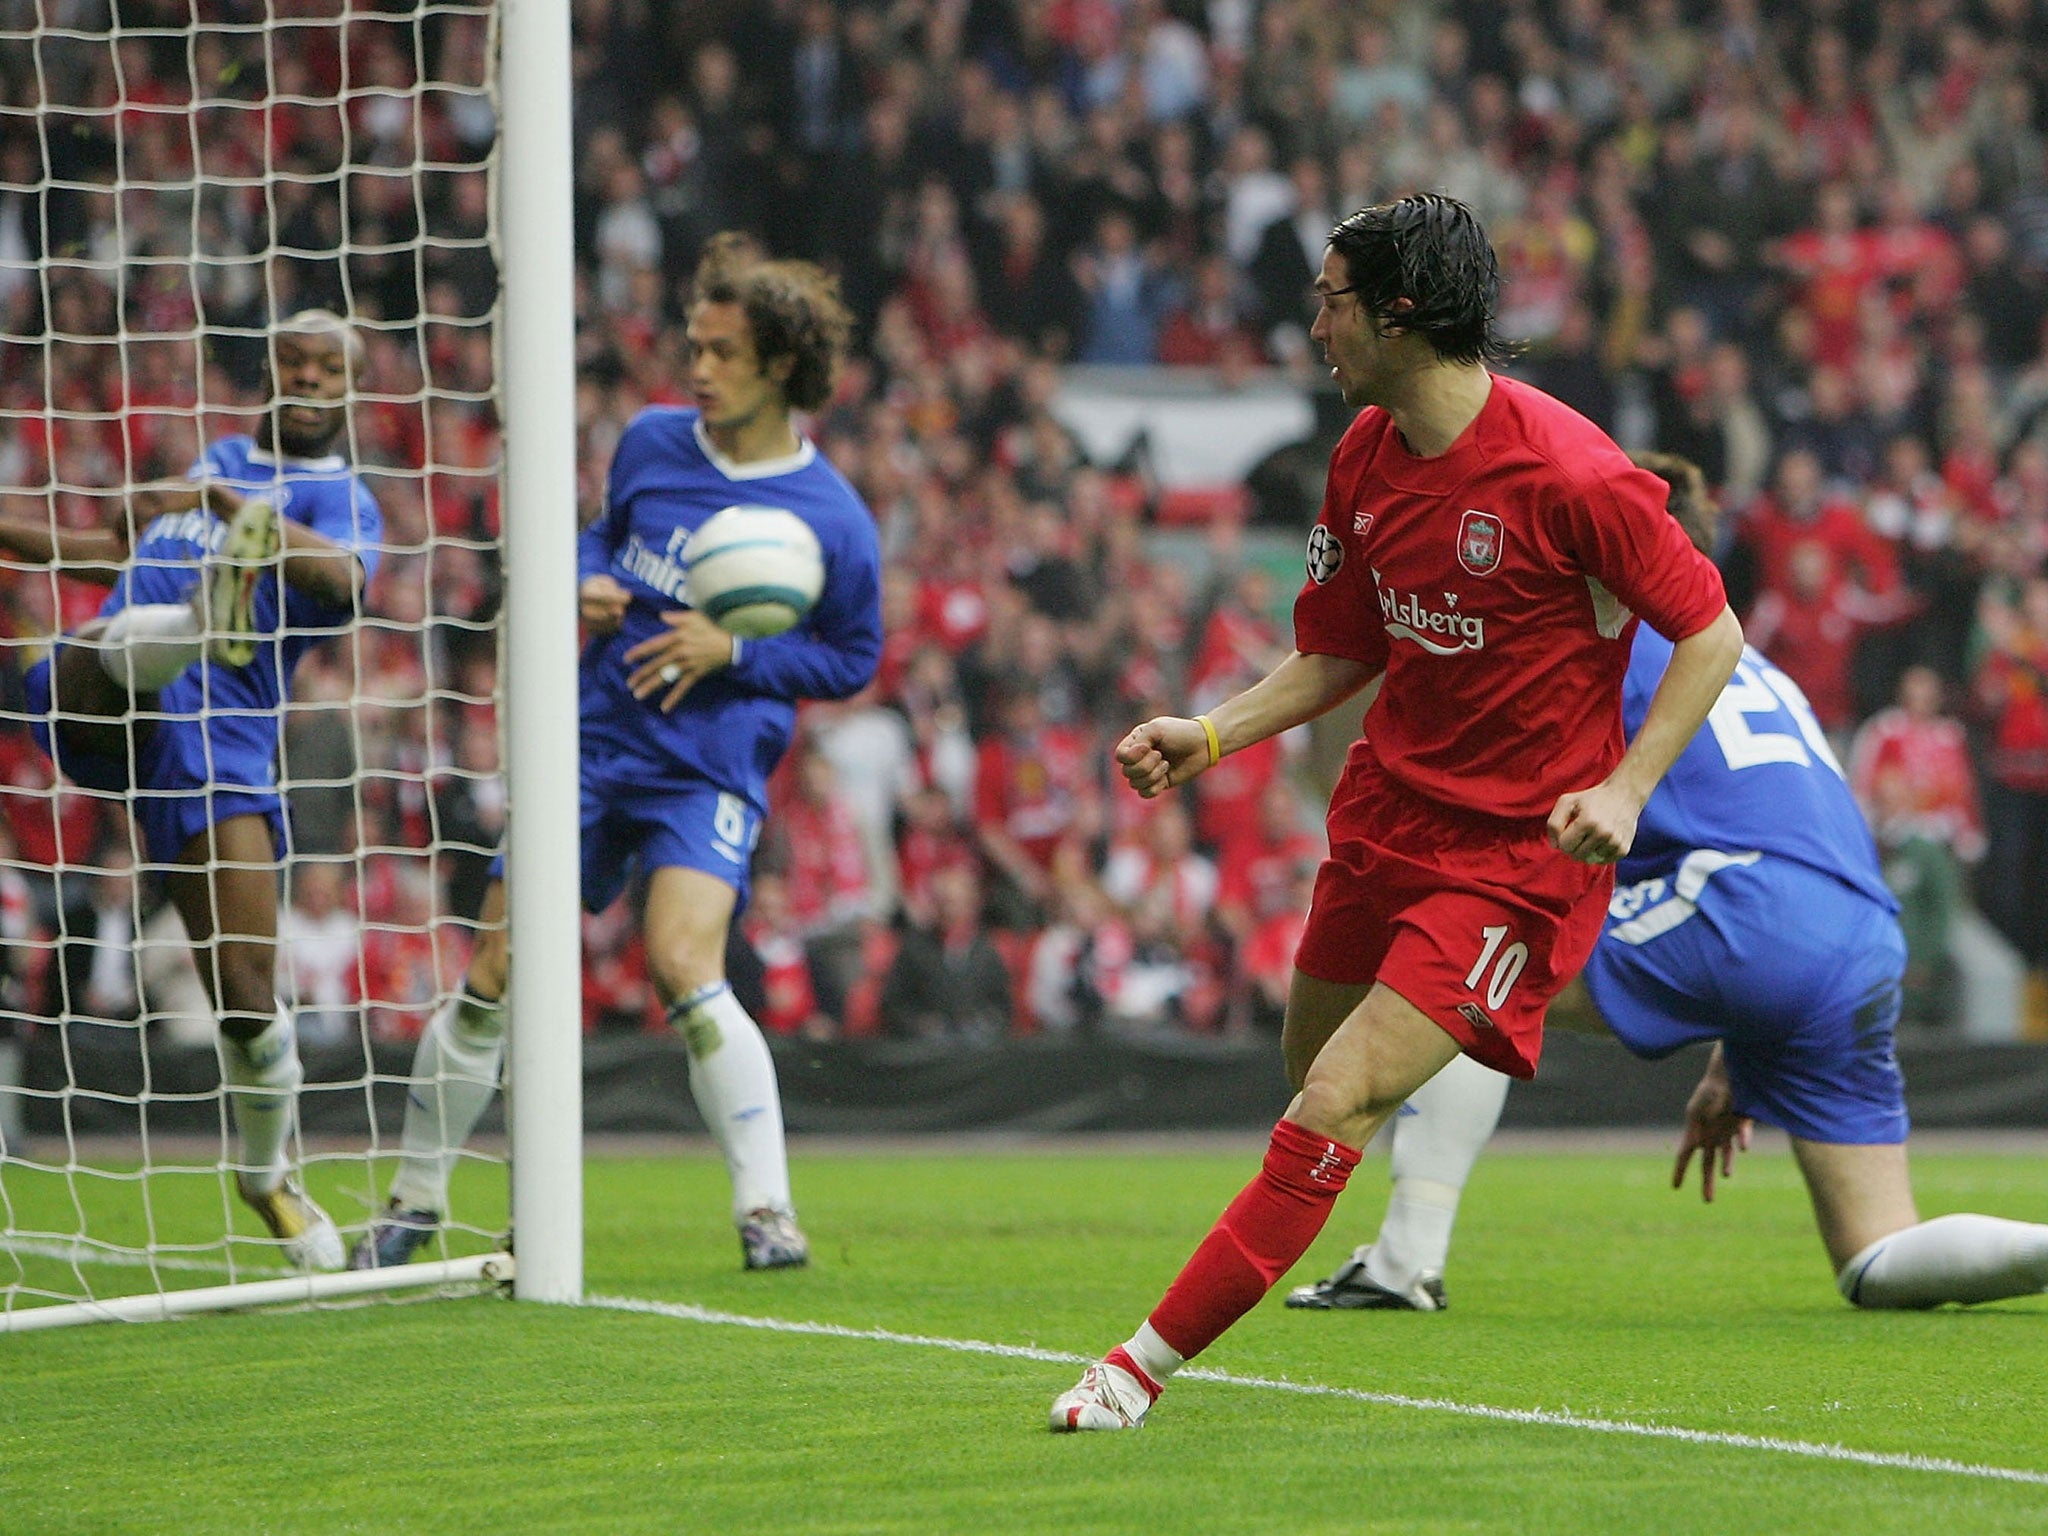 Garcia's ghost goal: In another duel with Liverpool, Chelsea lost in the Champions League semi-finals with a disputed goal from Luis Garcia. “It was a goal that came from the moon,” said Mourinho, who never acknowledged the goal in the future